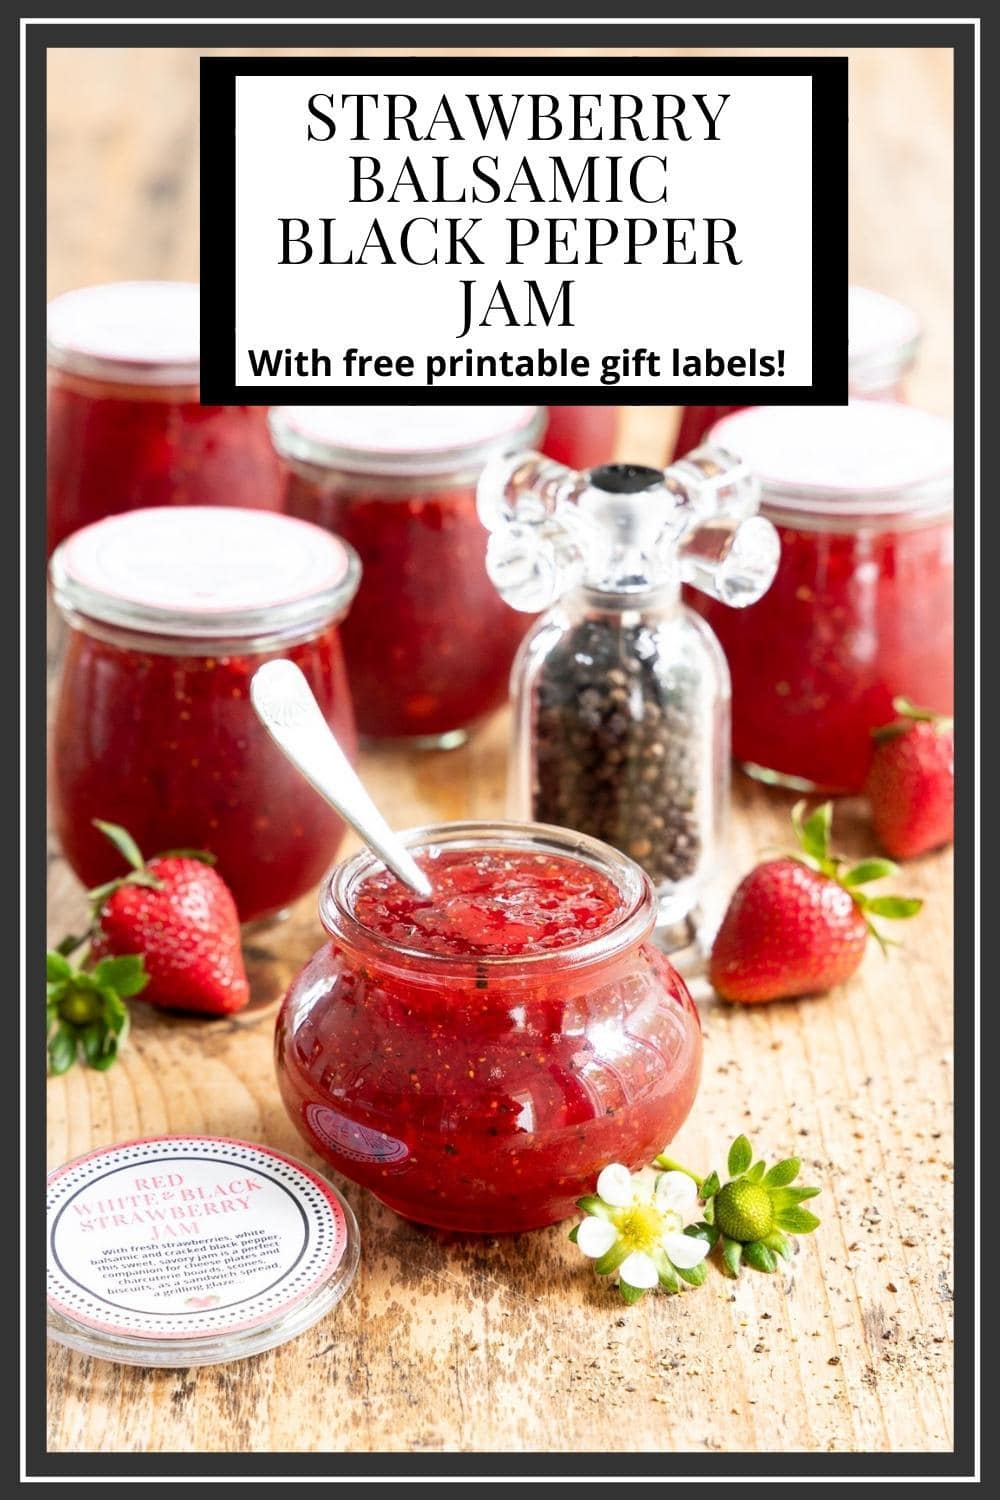 Strawberry Balsamic Black Pepper Jam (with free printable labels for gifting)